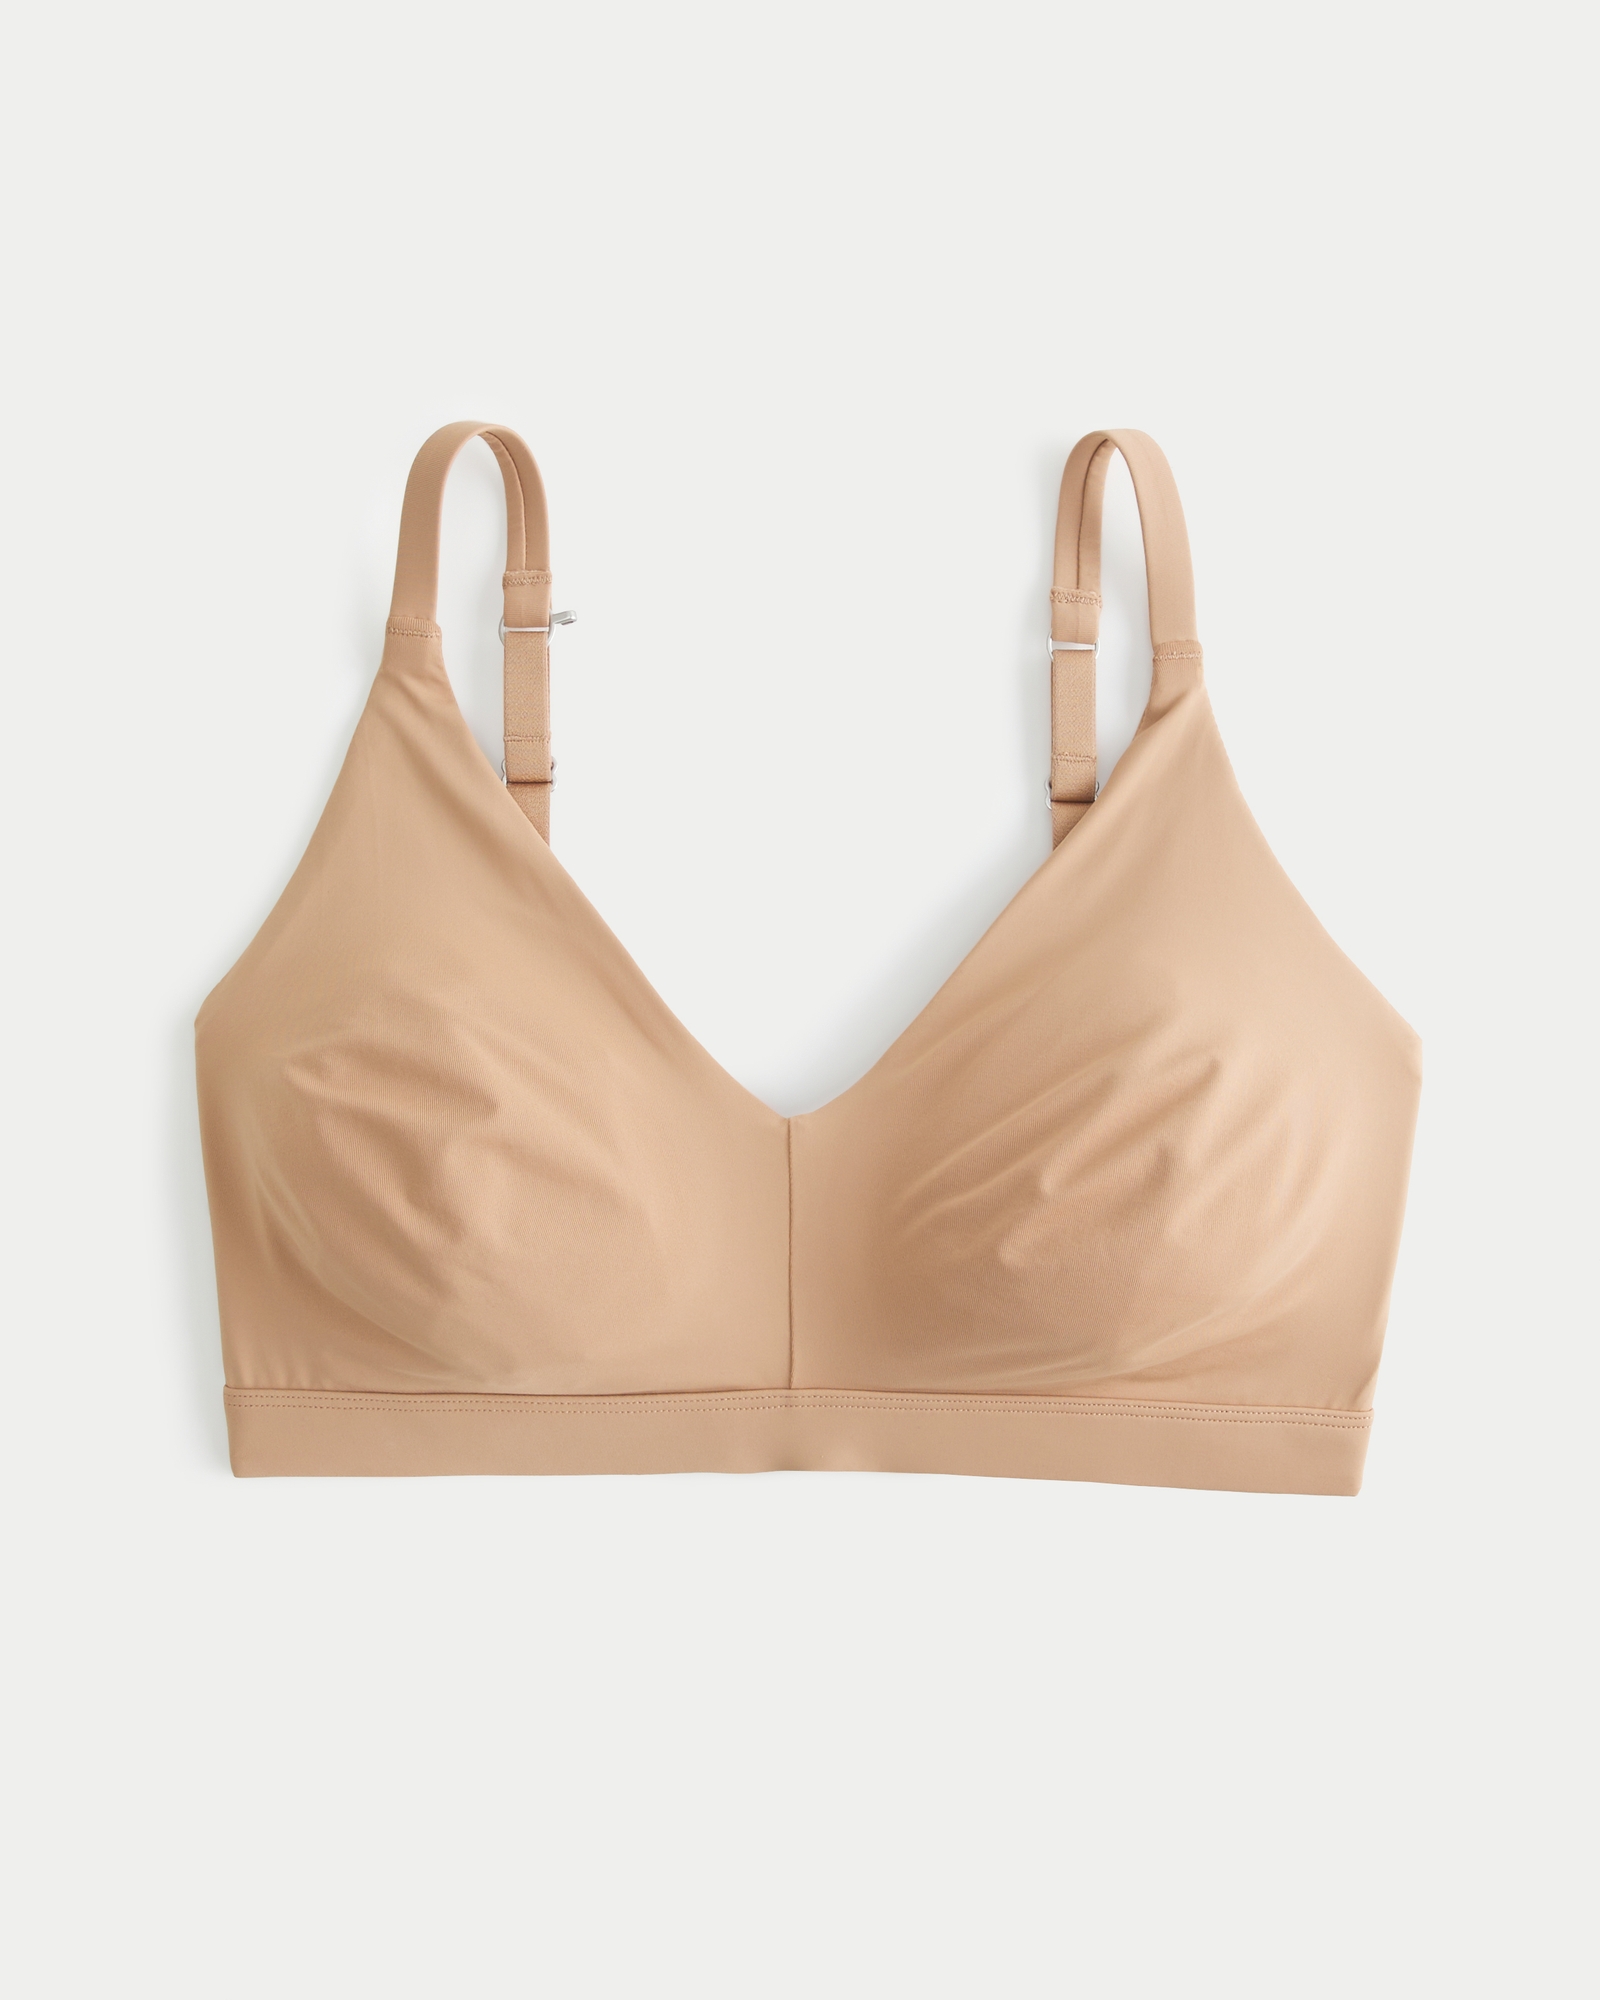 Gilly Hicks Jersey Ribbed Triangle Lounge Bralette